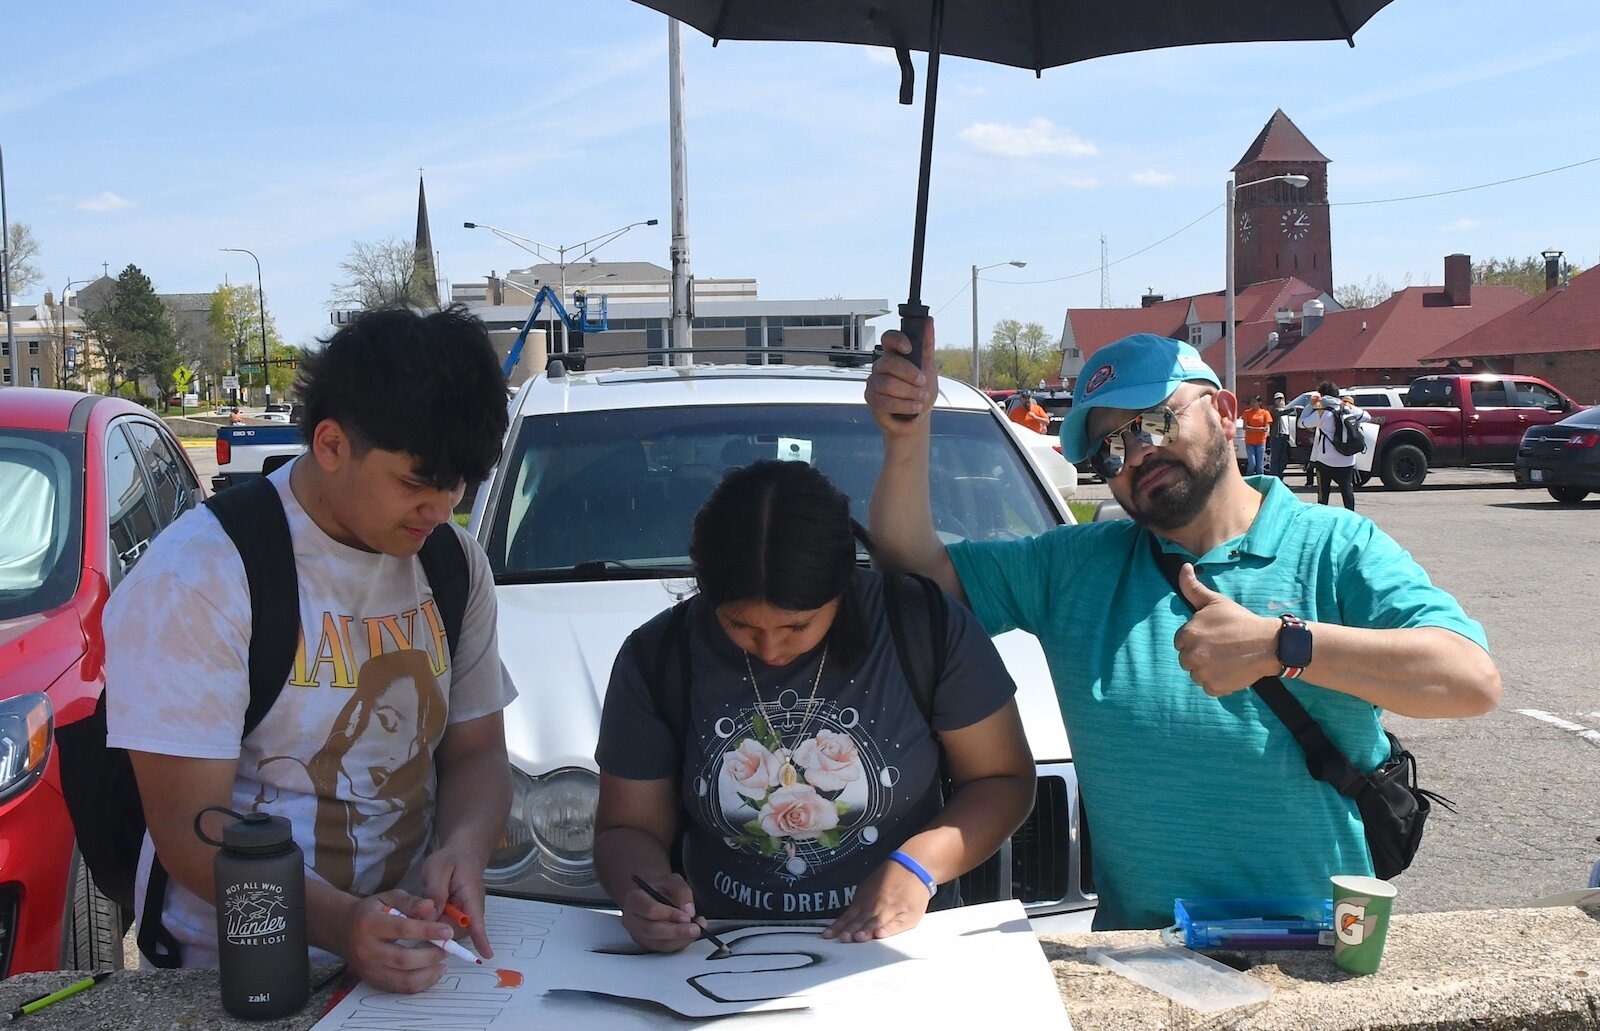 Preparing signs prior to an anti-gun violence march and rally in downtown Battle Creek are from left, Jon Contreras, Ariana Chavez, and holding the umbrella Albert Hernandes.